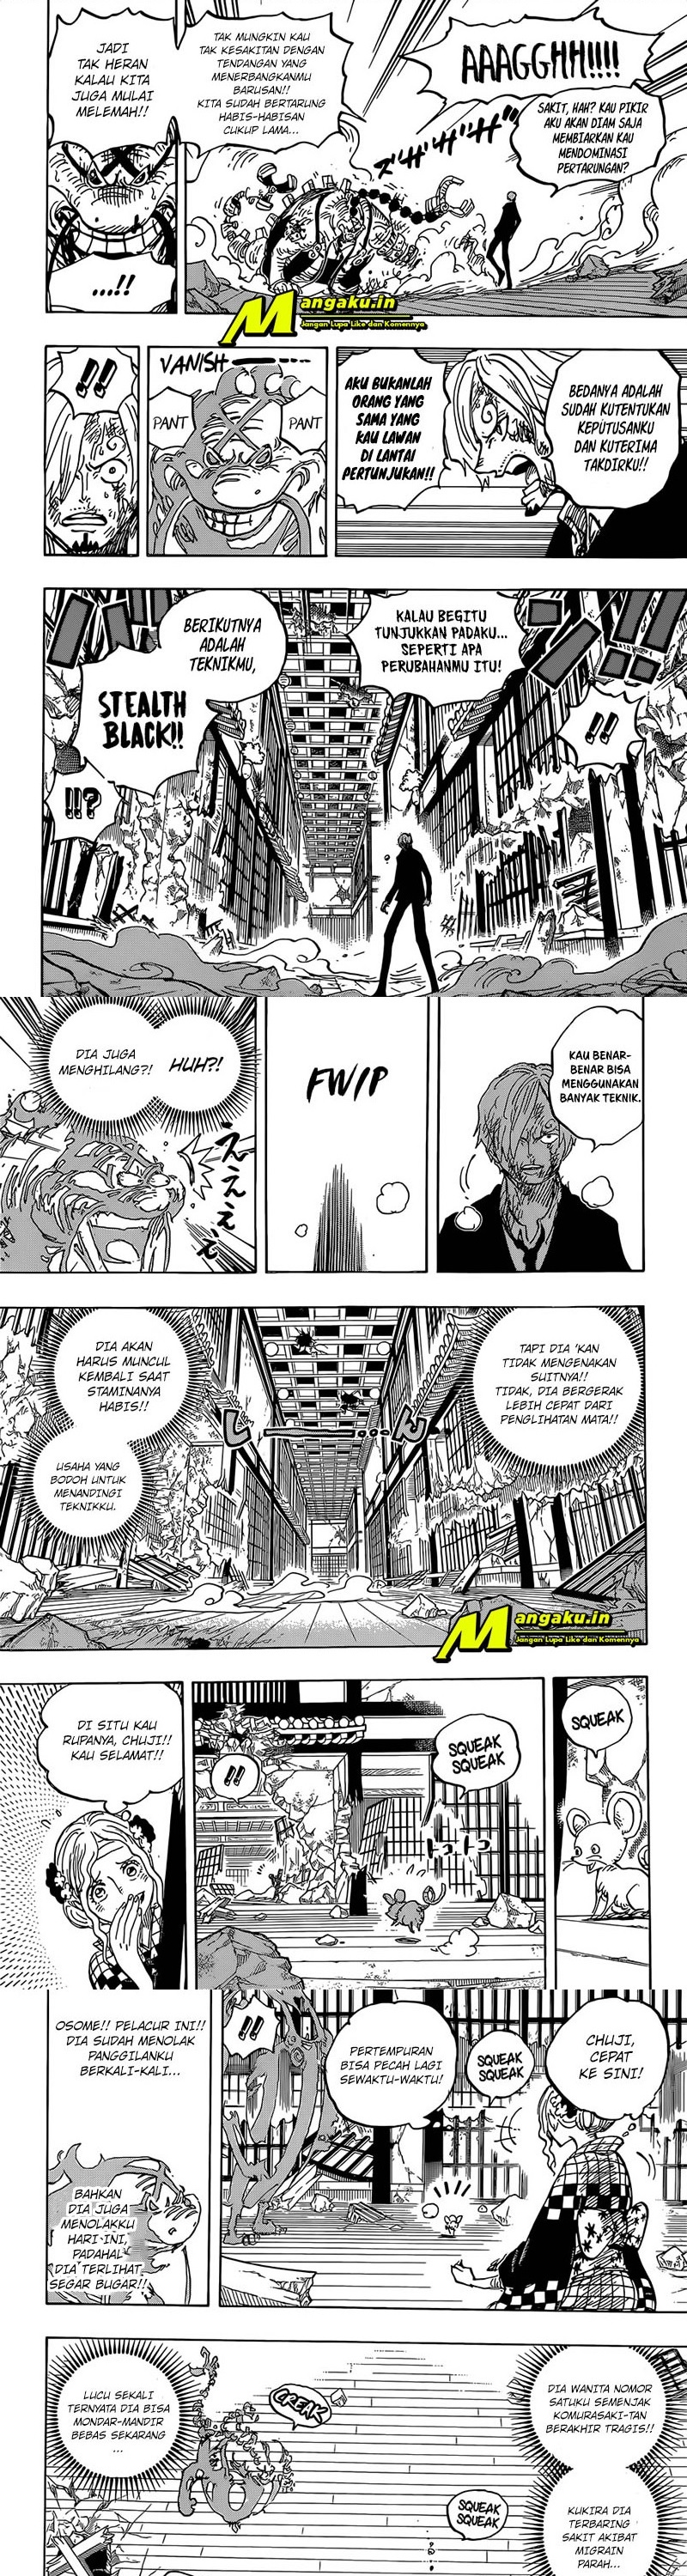 One Piece Chapter 1034 HQ